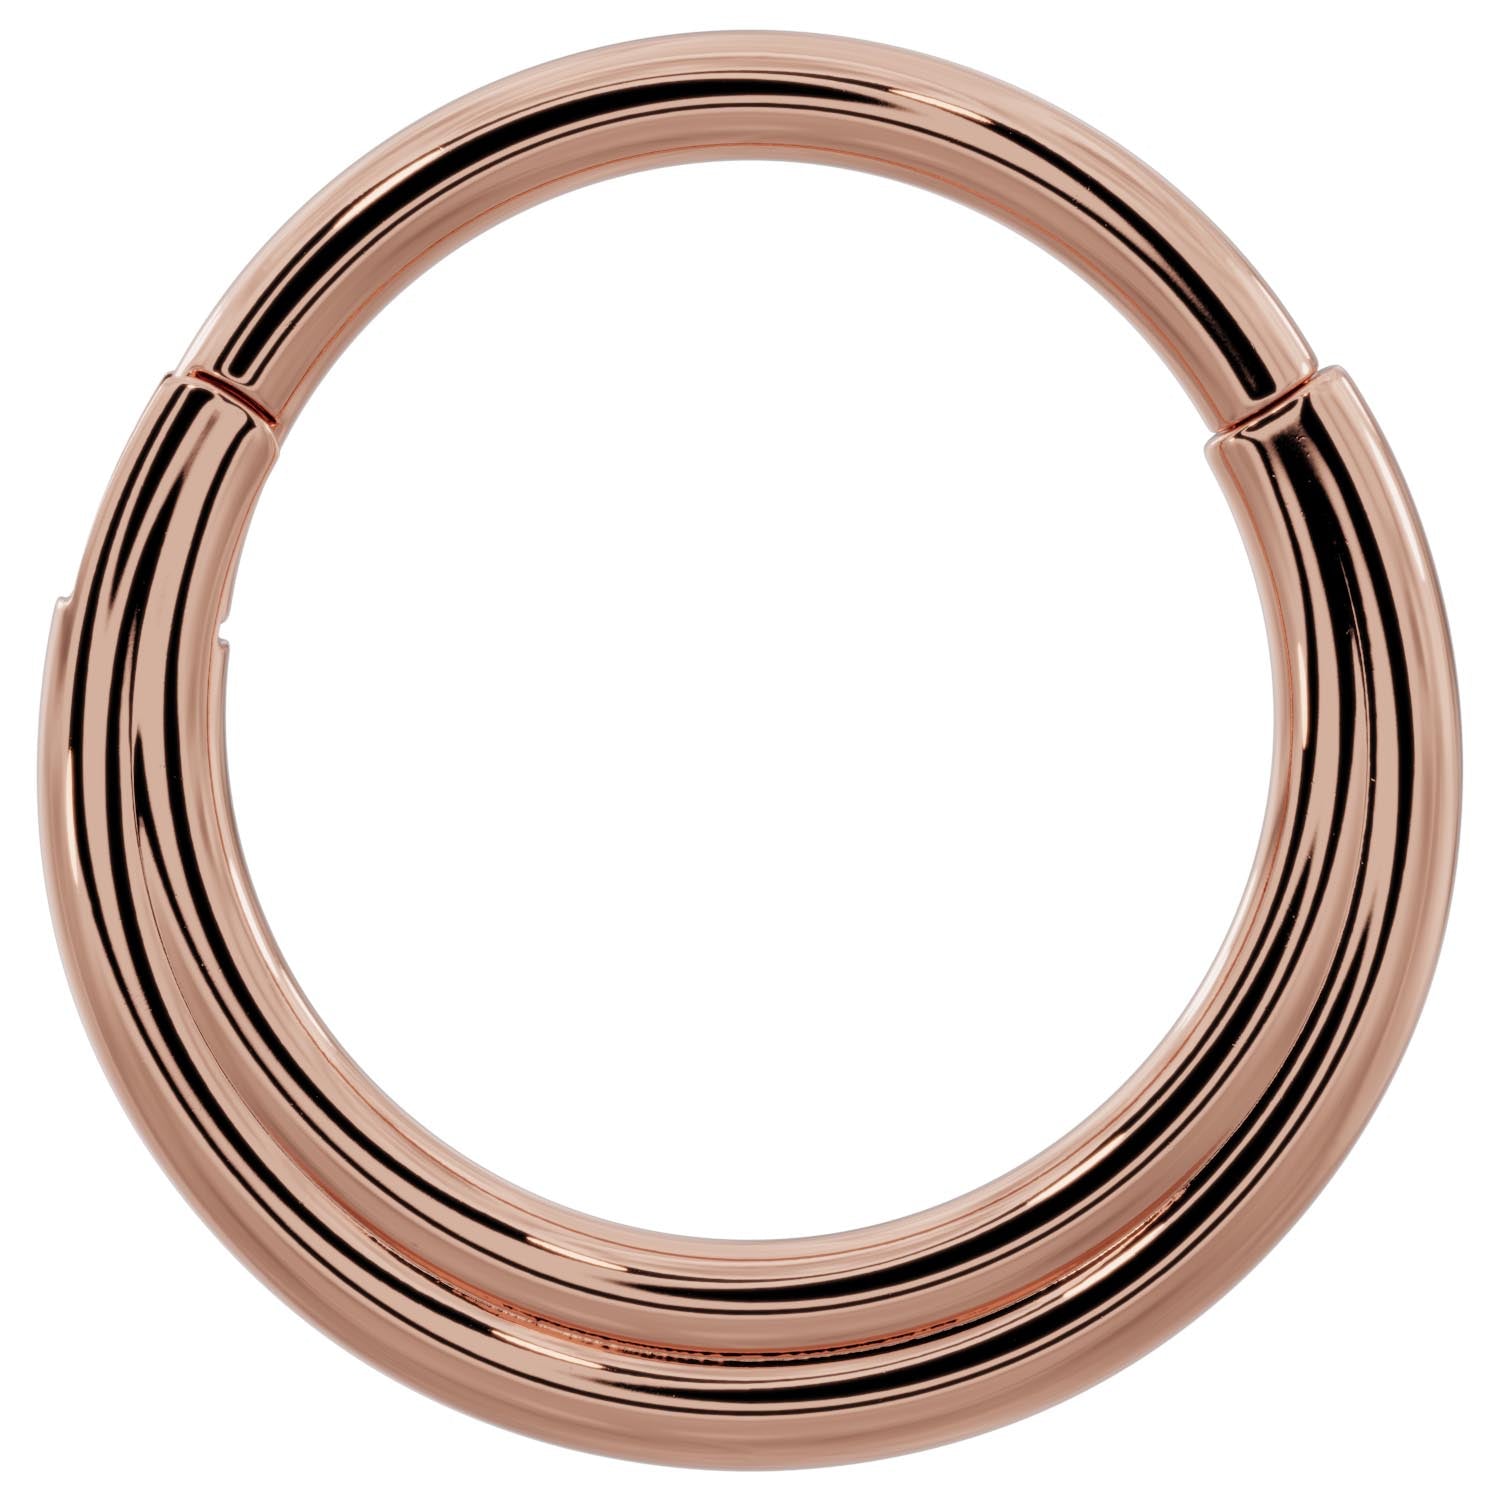 Two Band Eternity 14k Gold Clicker Ring Hoop-14K Rose Gold   14G (1.6mm)   5 8